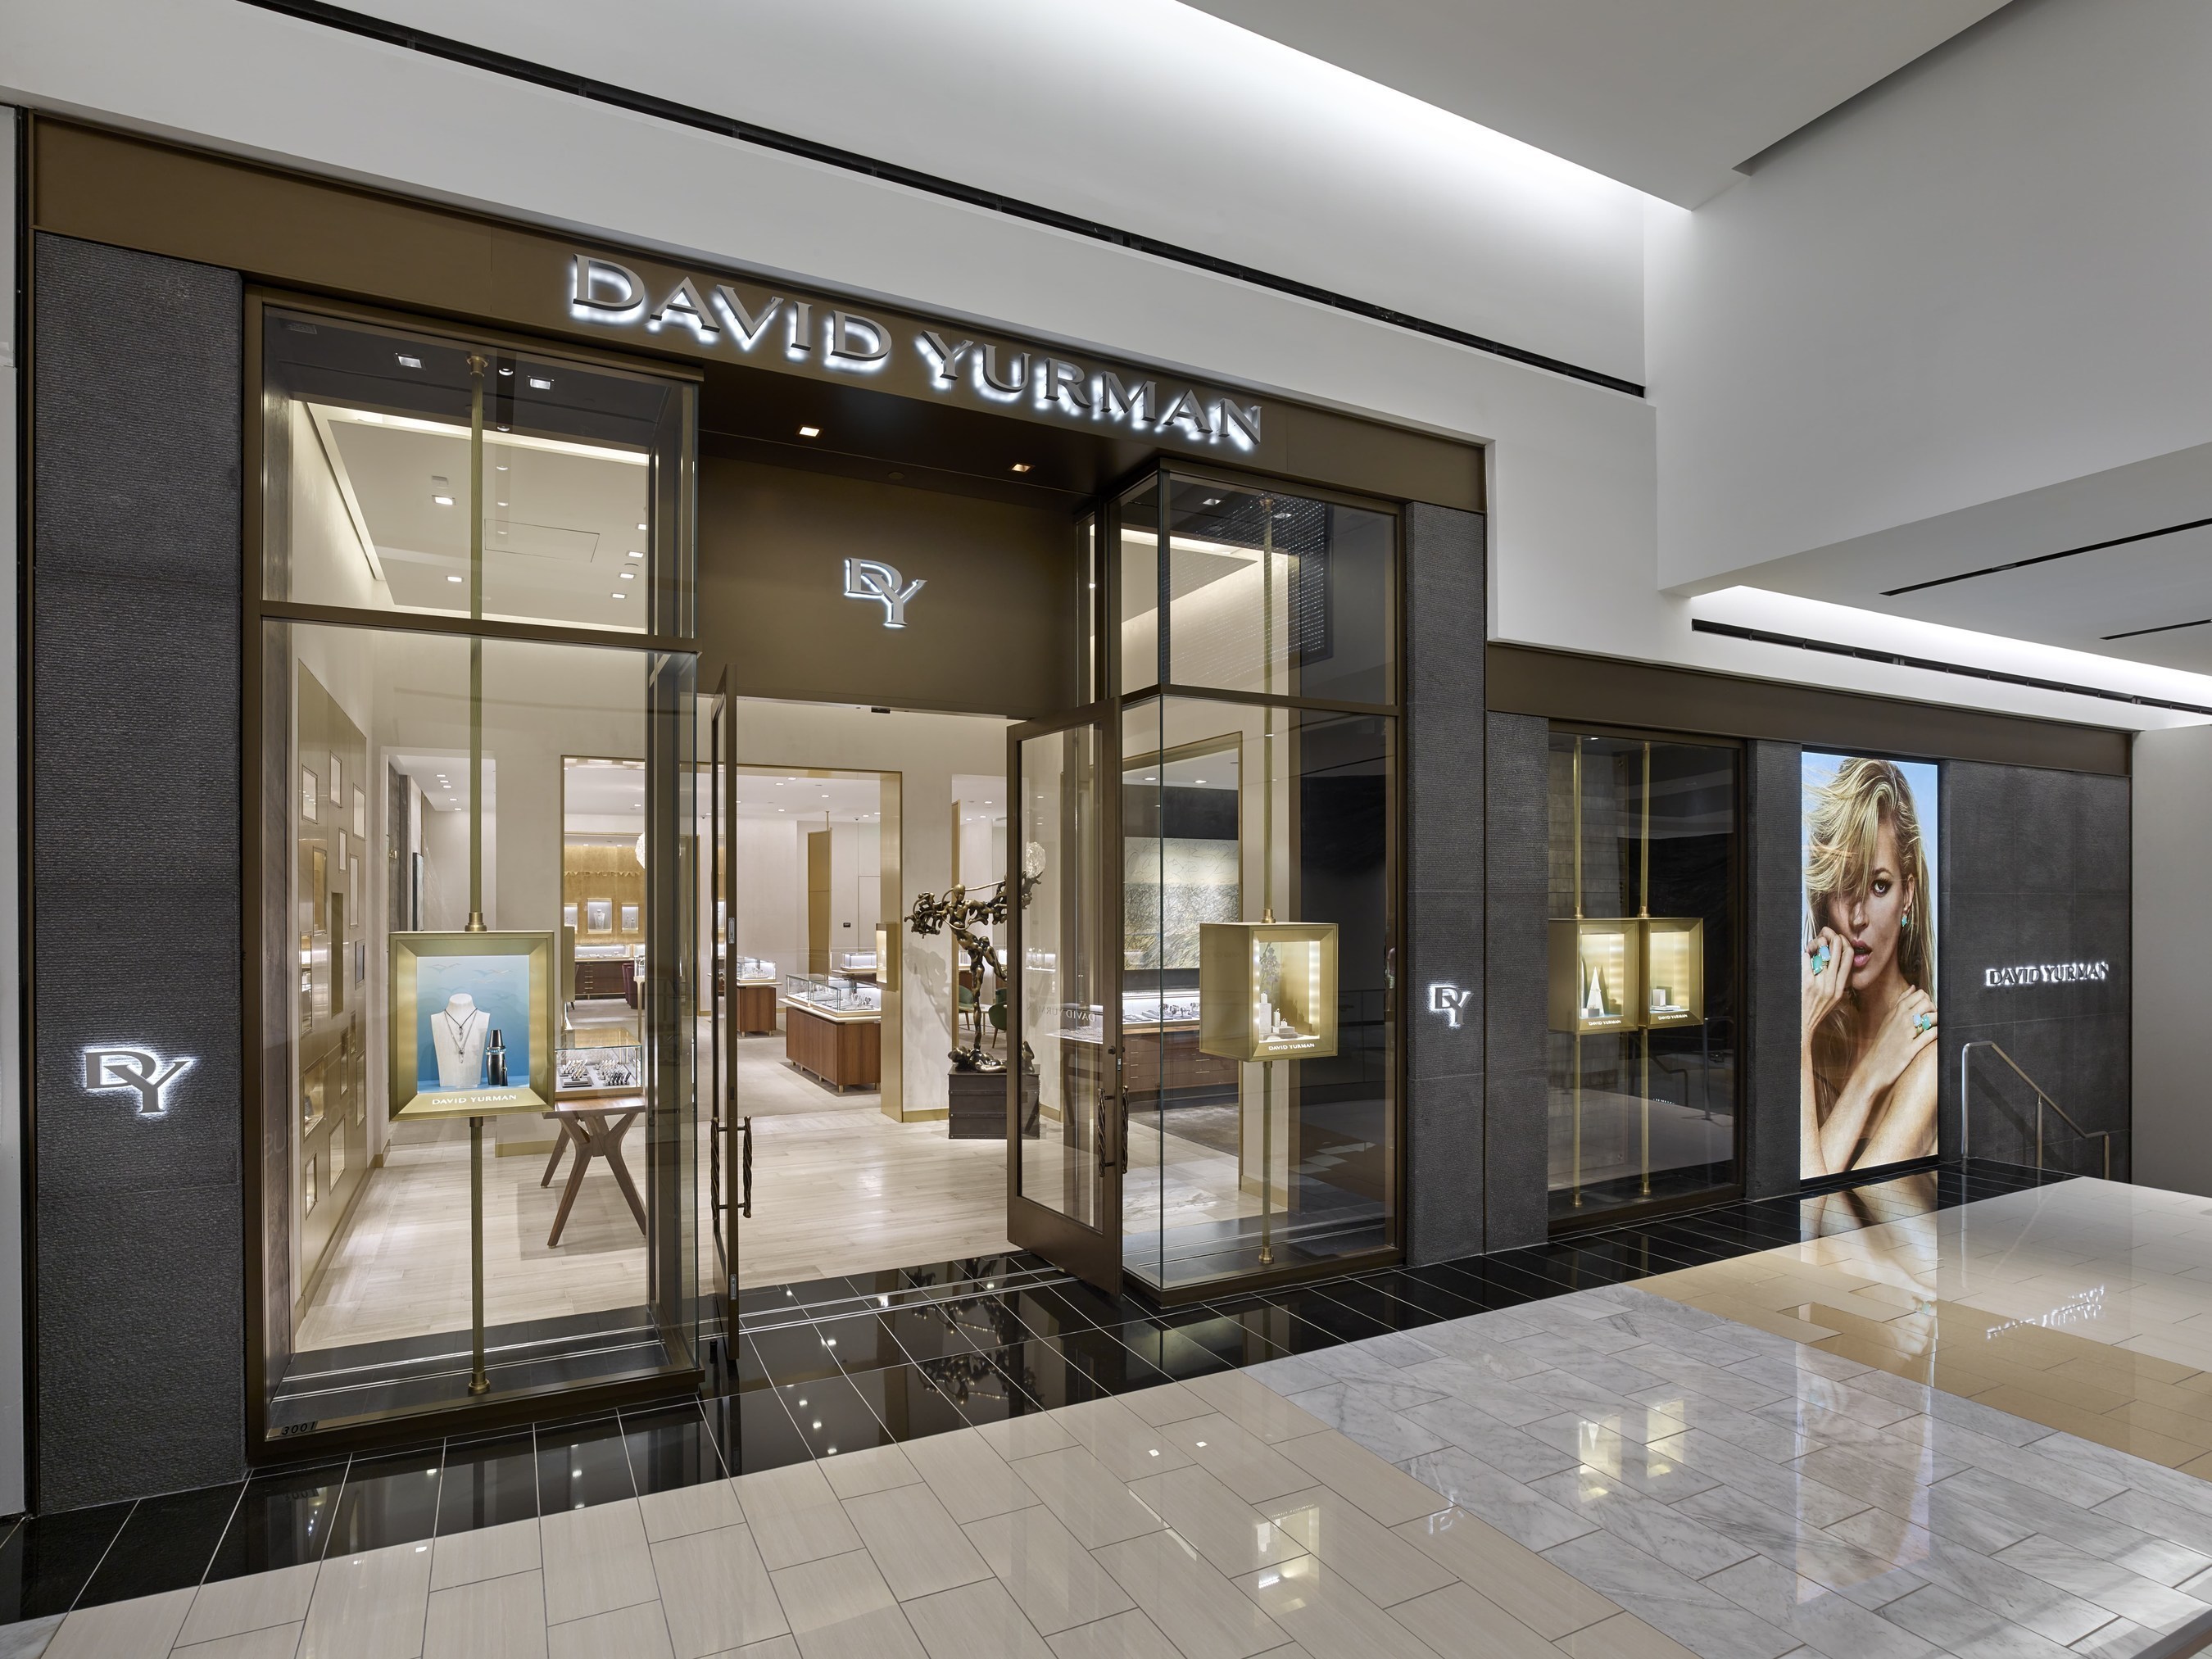 David Yurman Boutique Exterior at King of Prussia Mall in King of Prussia, PA (Courtesy of Jeffrey Totaro)